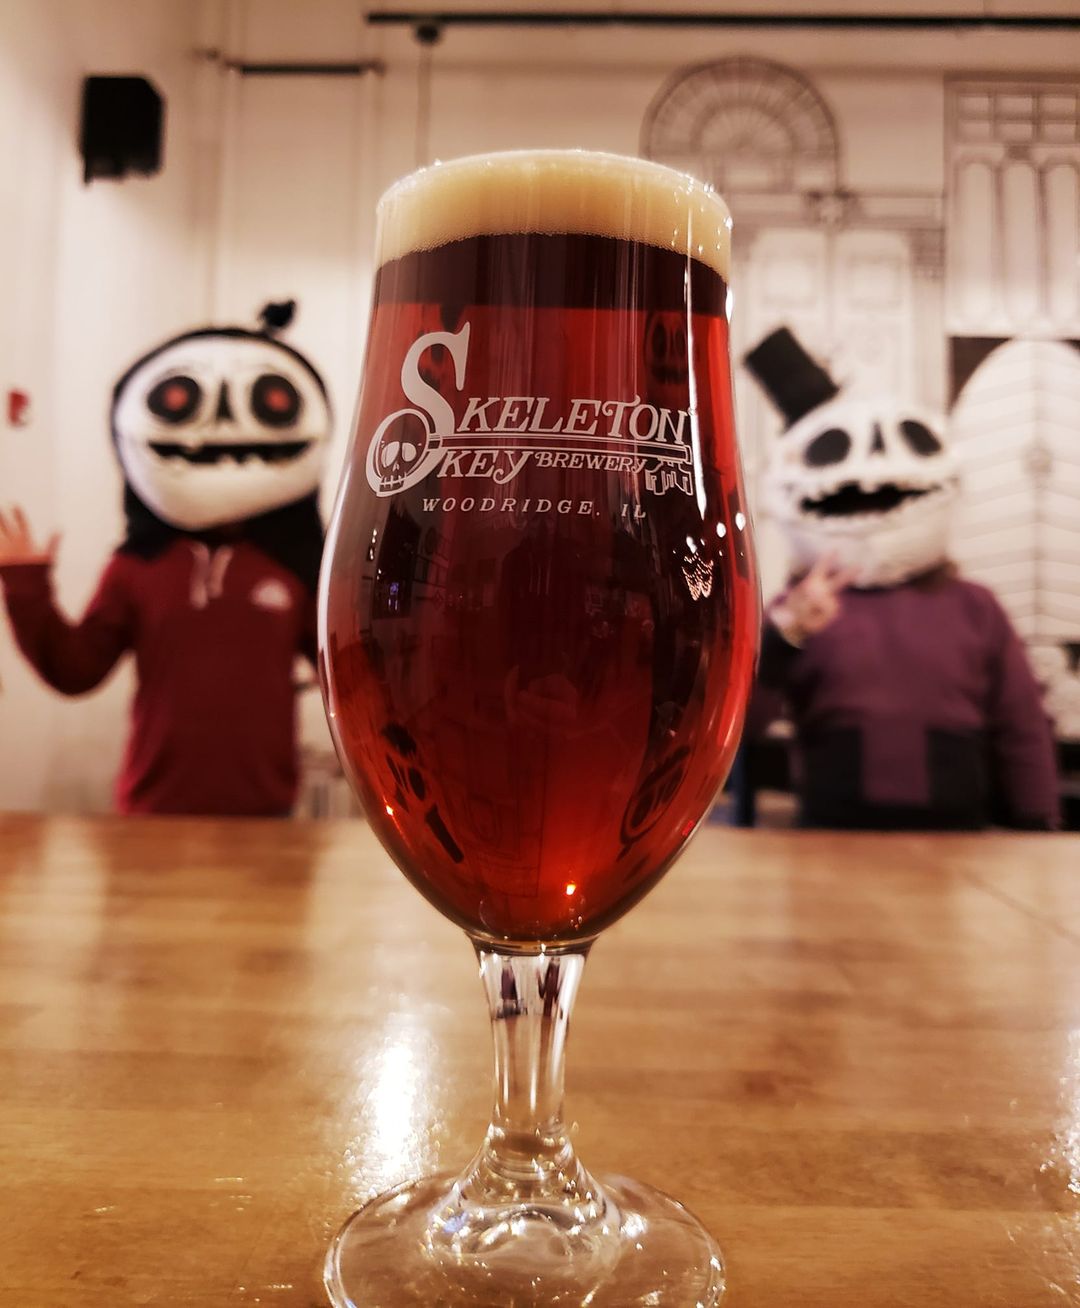 Glass of Don't Blink in the foreground from Skeleton Key Brewery, with two guys in skull head costumes in the blurry background